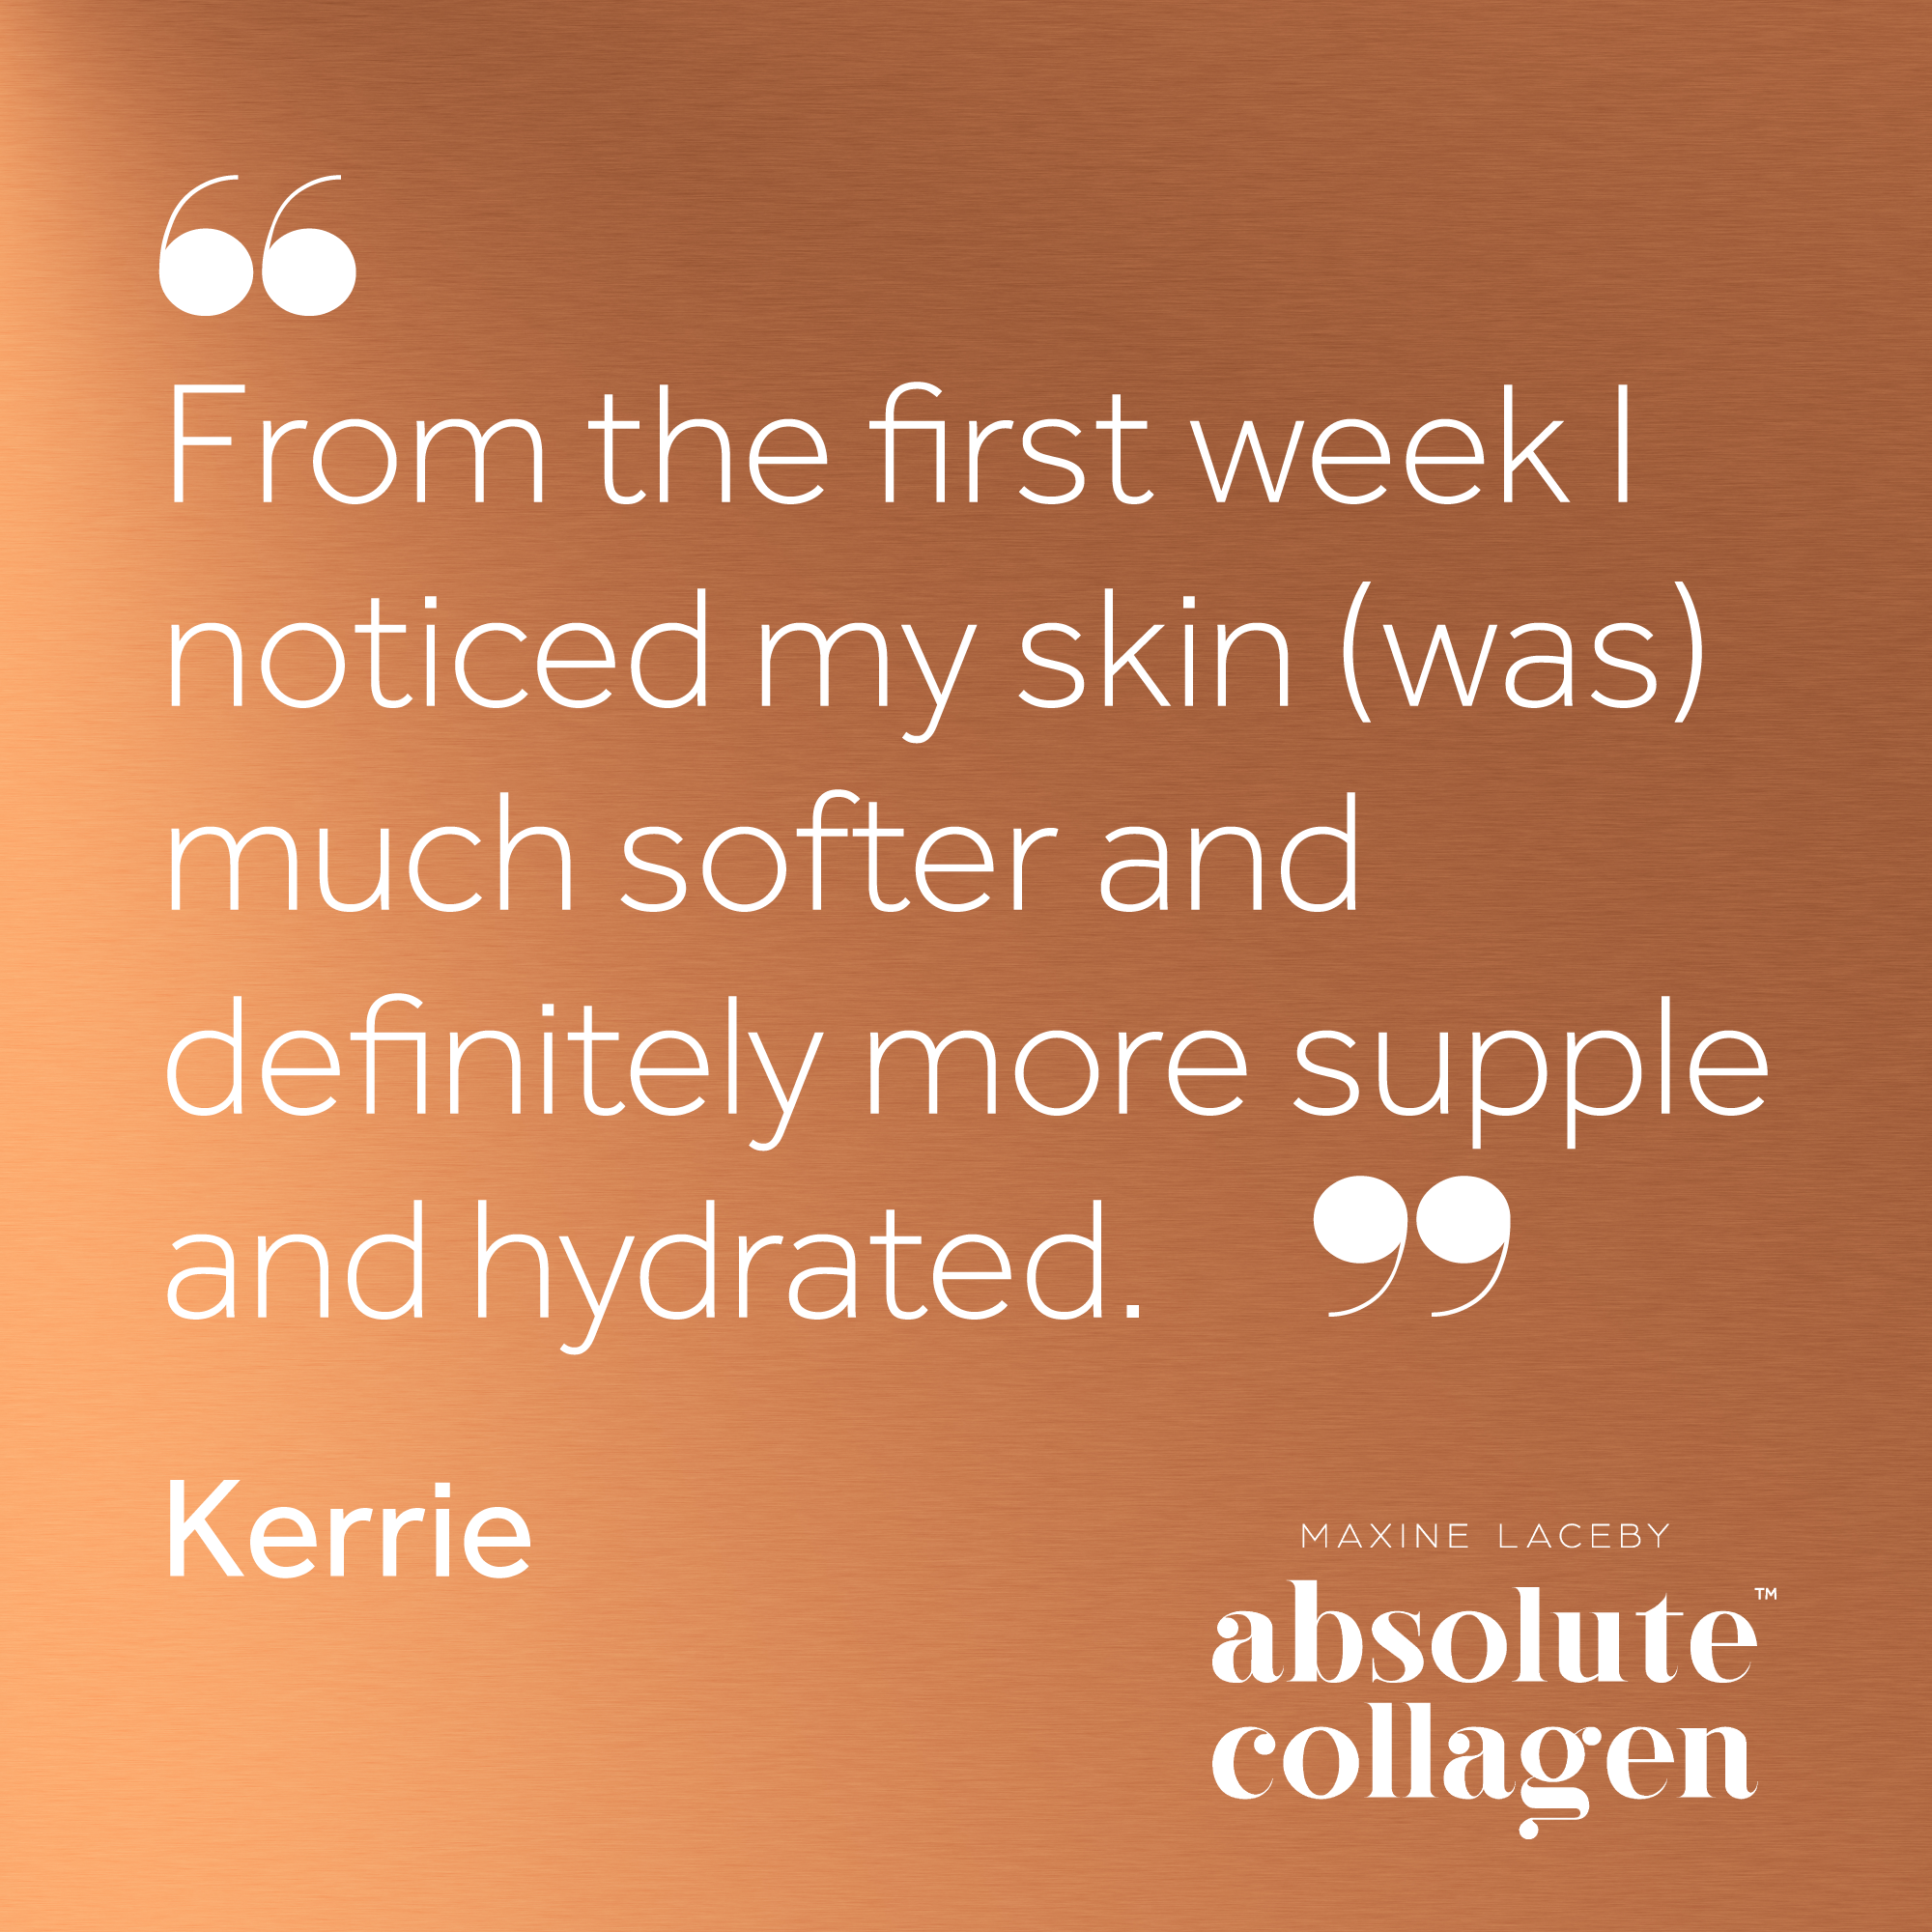 Quote from Kerri describing how Absolut Collagen boosted her skin